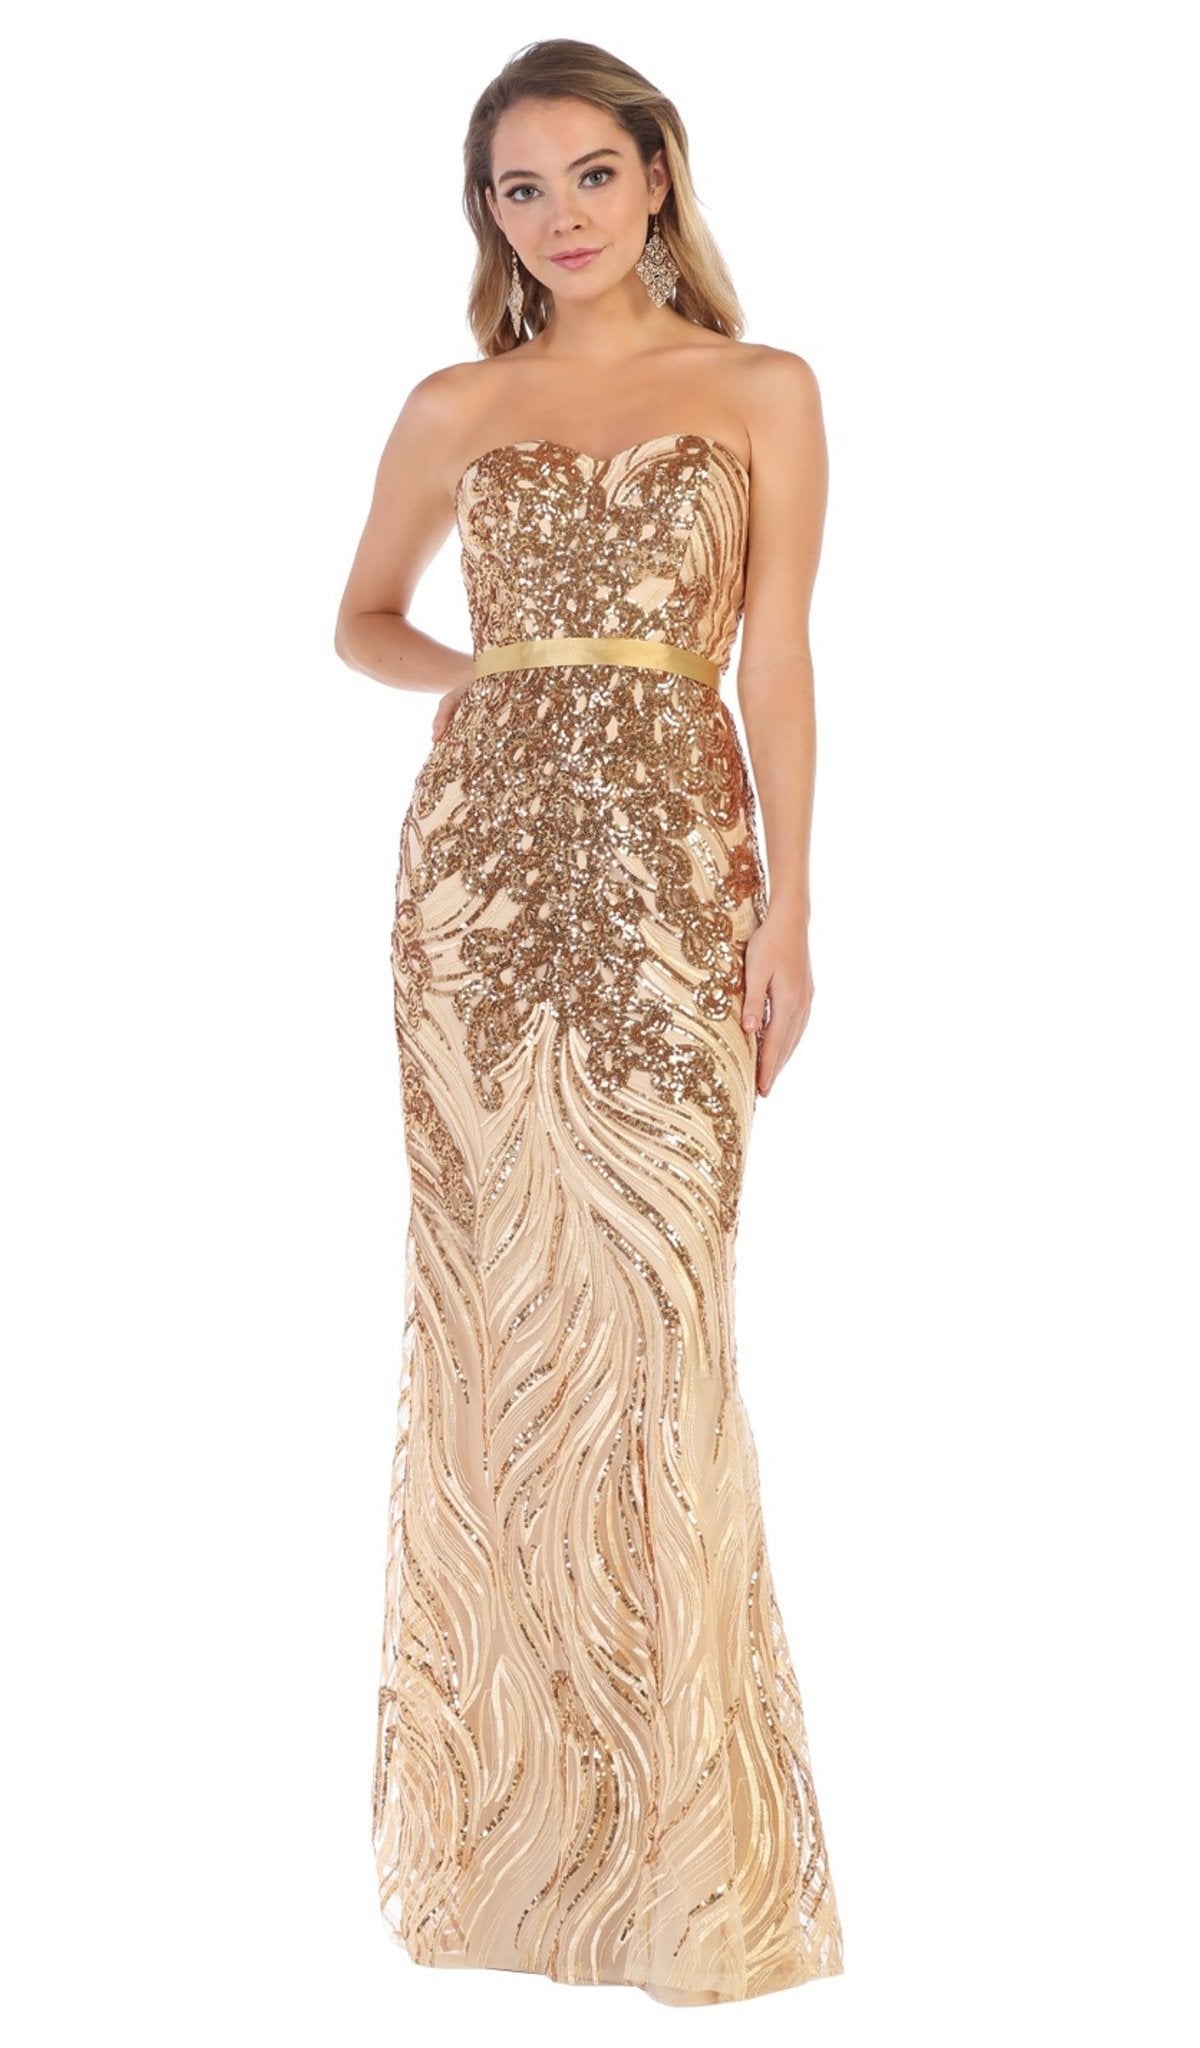 May Queen - RQ7685 Strapless Sequin Embellish Gown Special Occasion Dress 4 / Gold